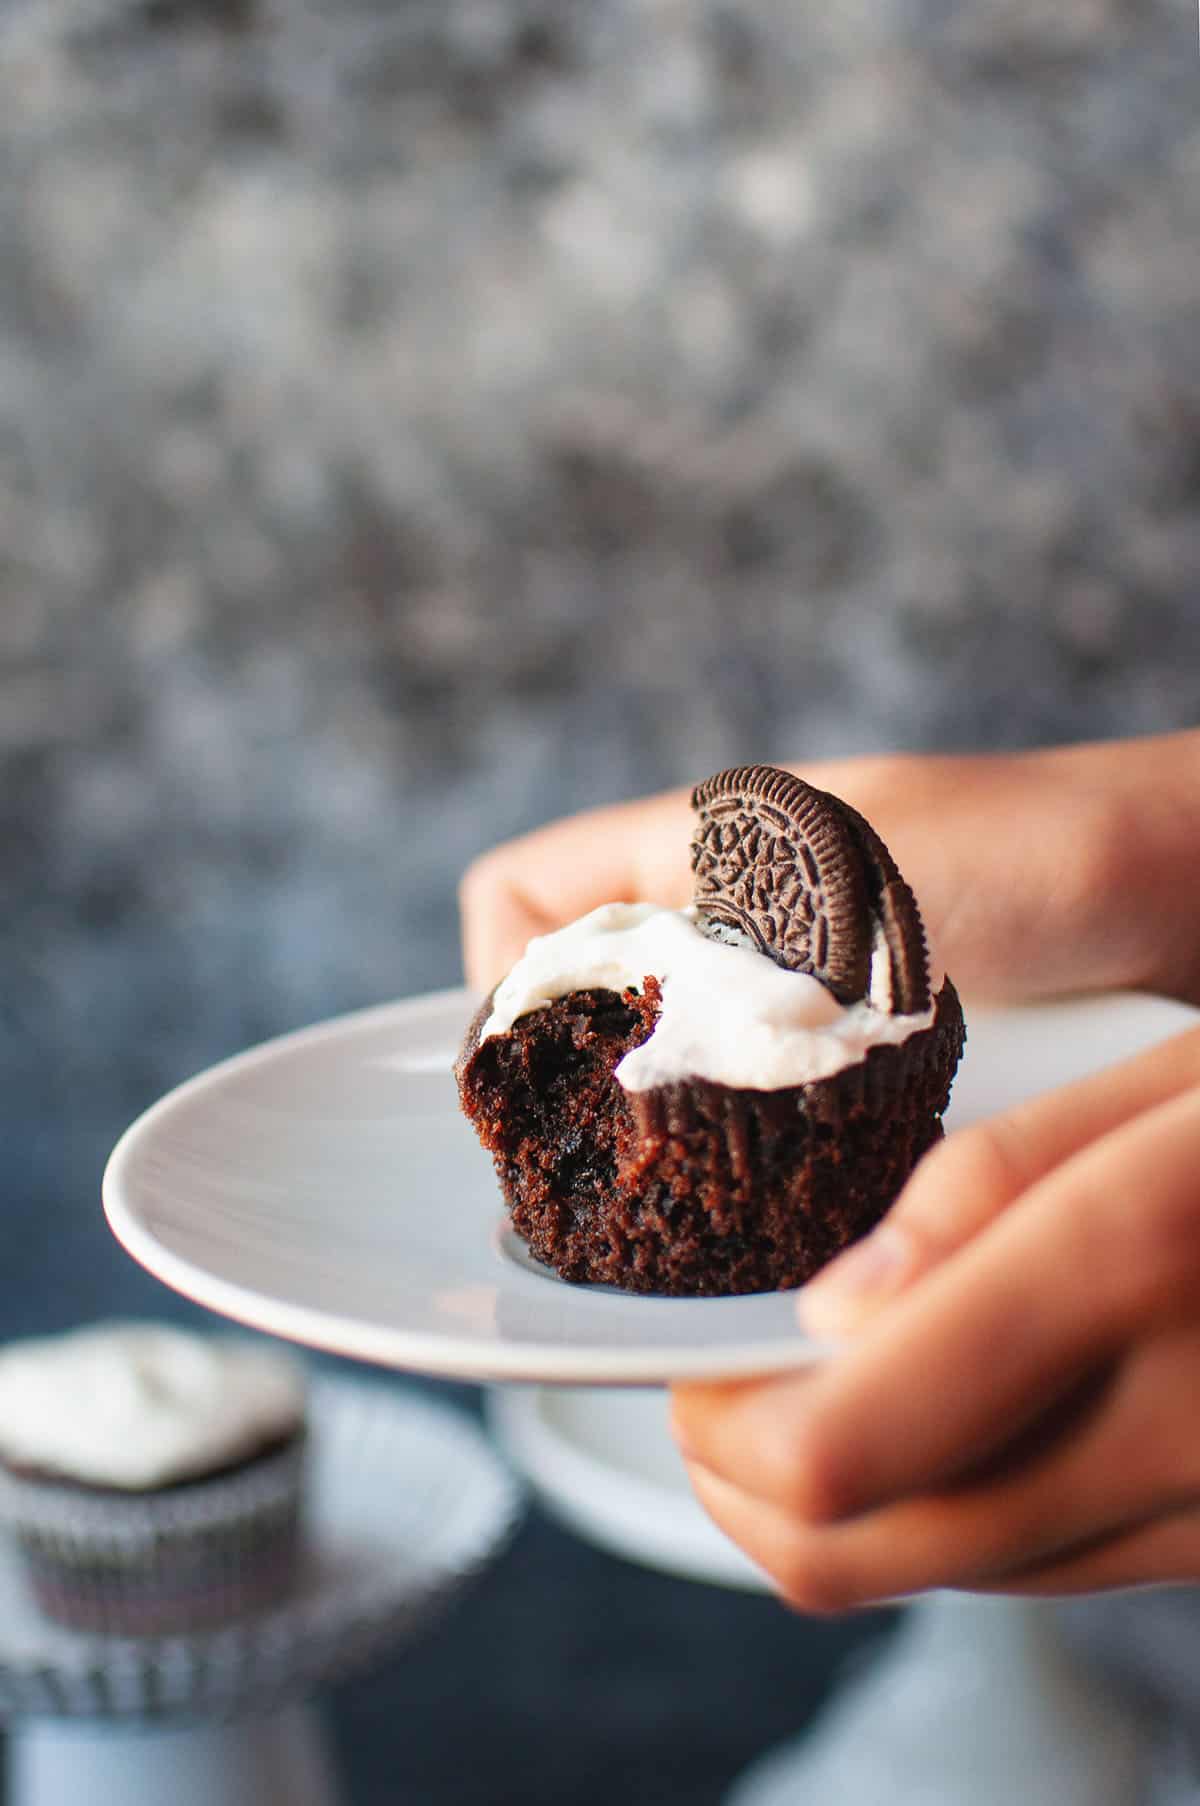 Hand holding a plate with bitten chocolate cupcake.